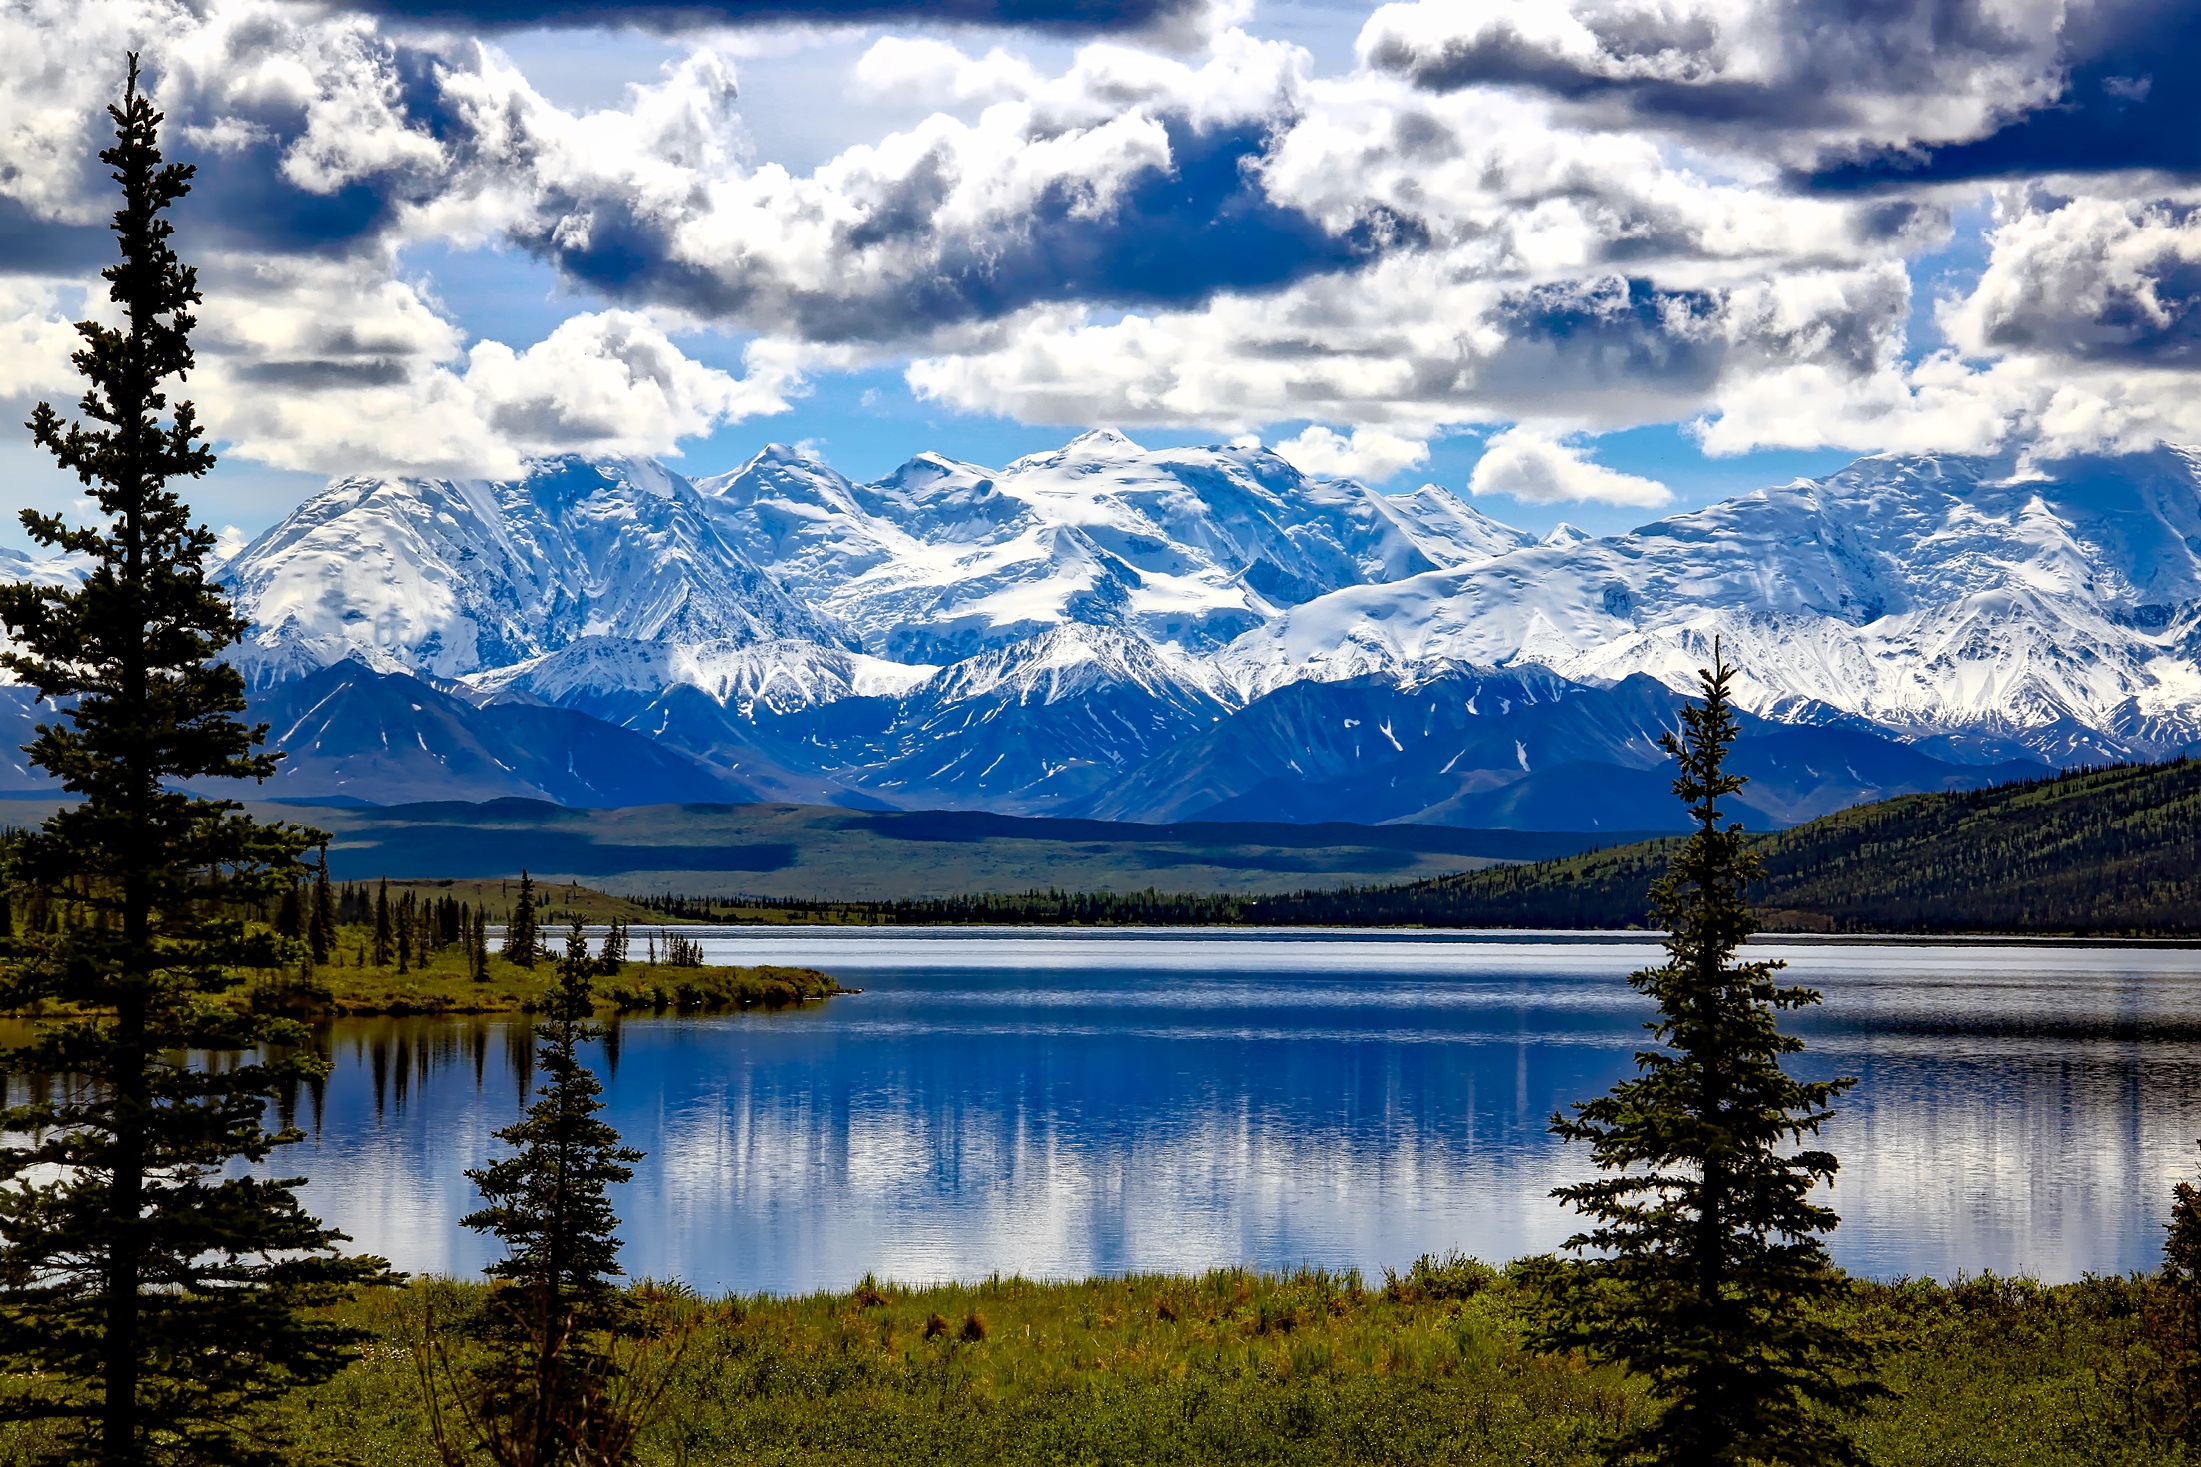 Free photo Stunning scenery with large snow-capped mountains and a lake